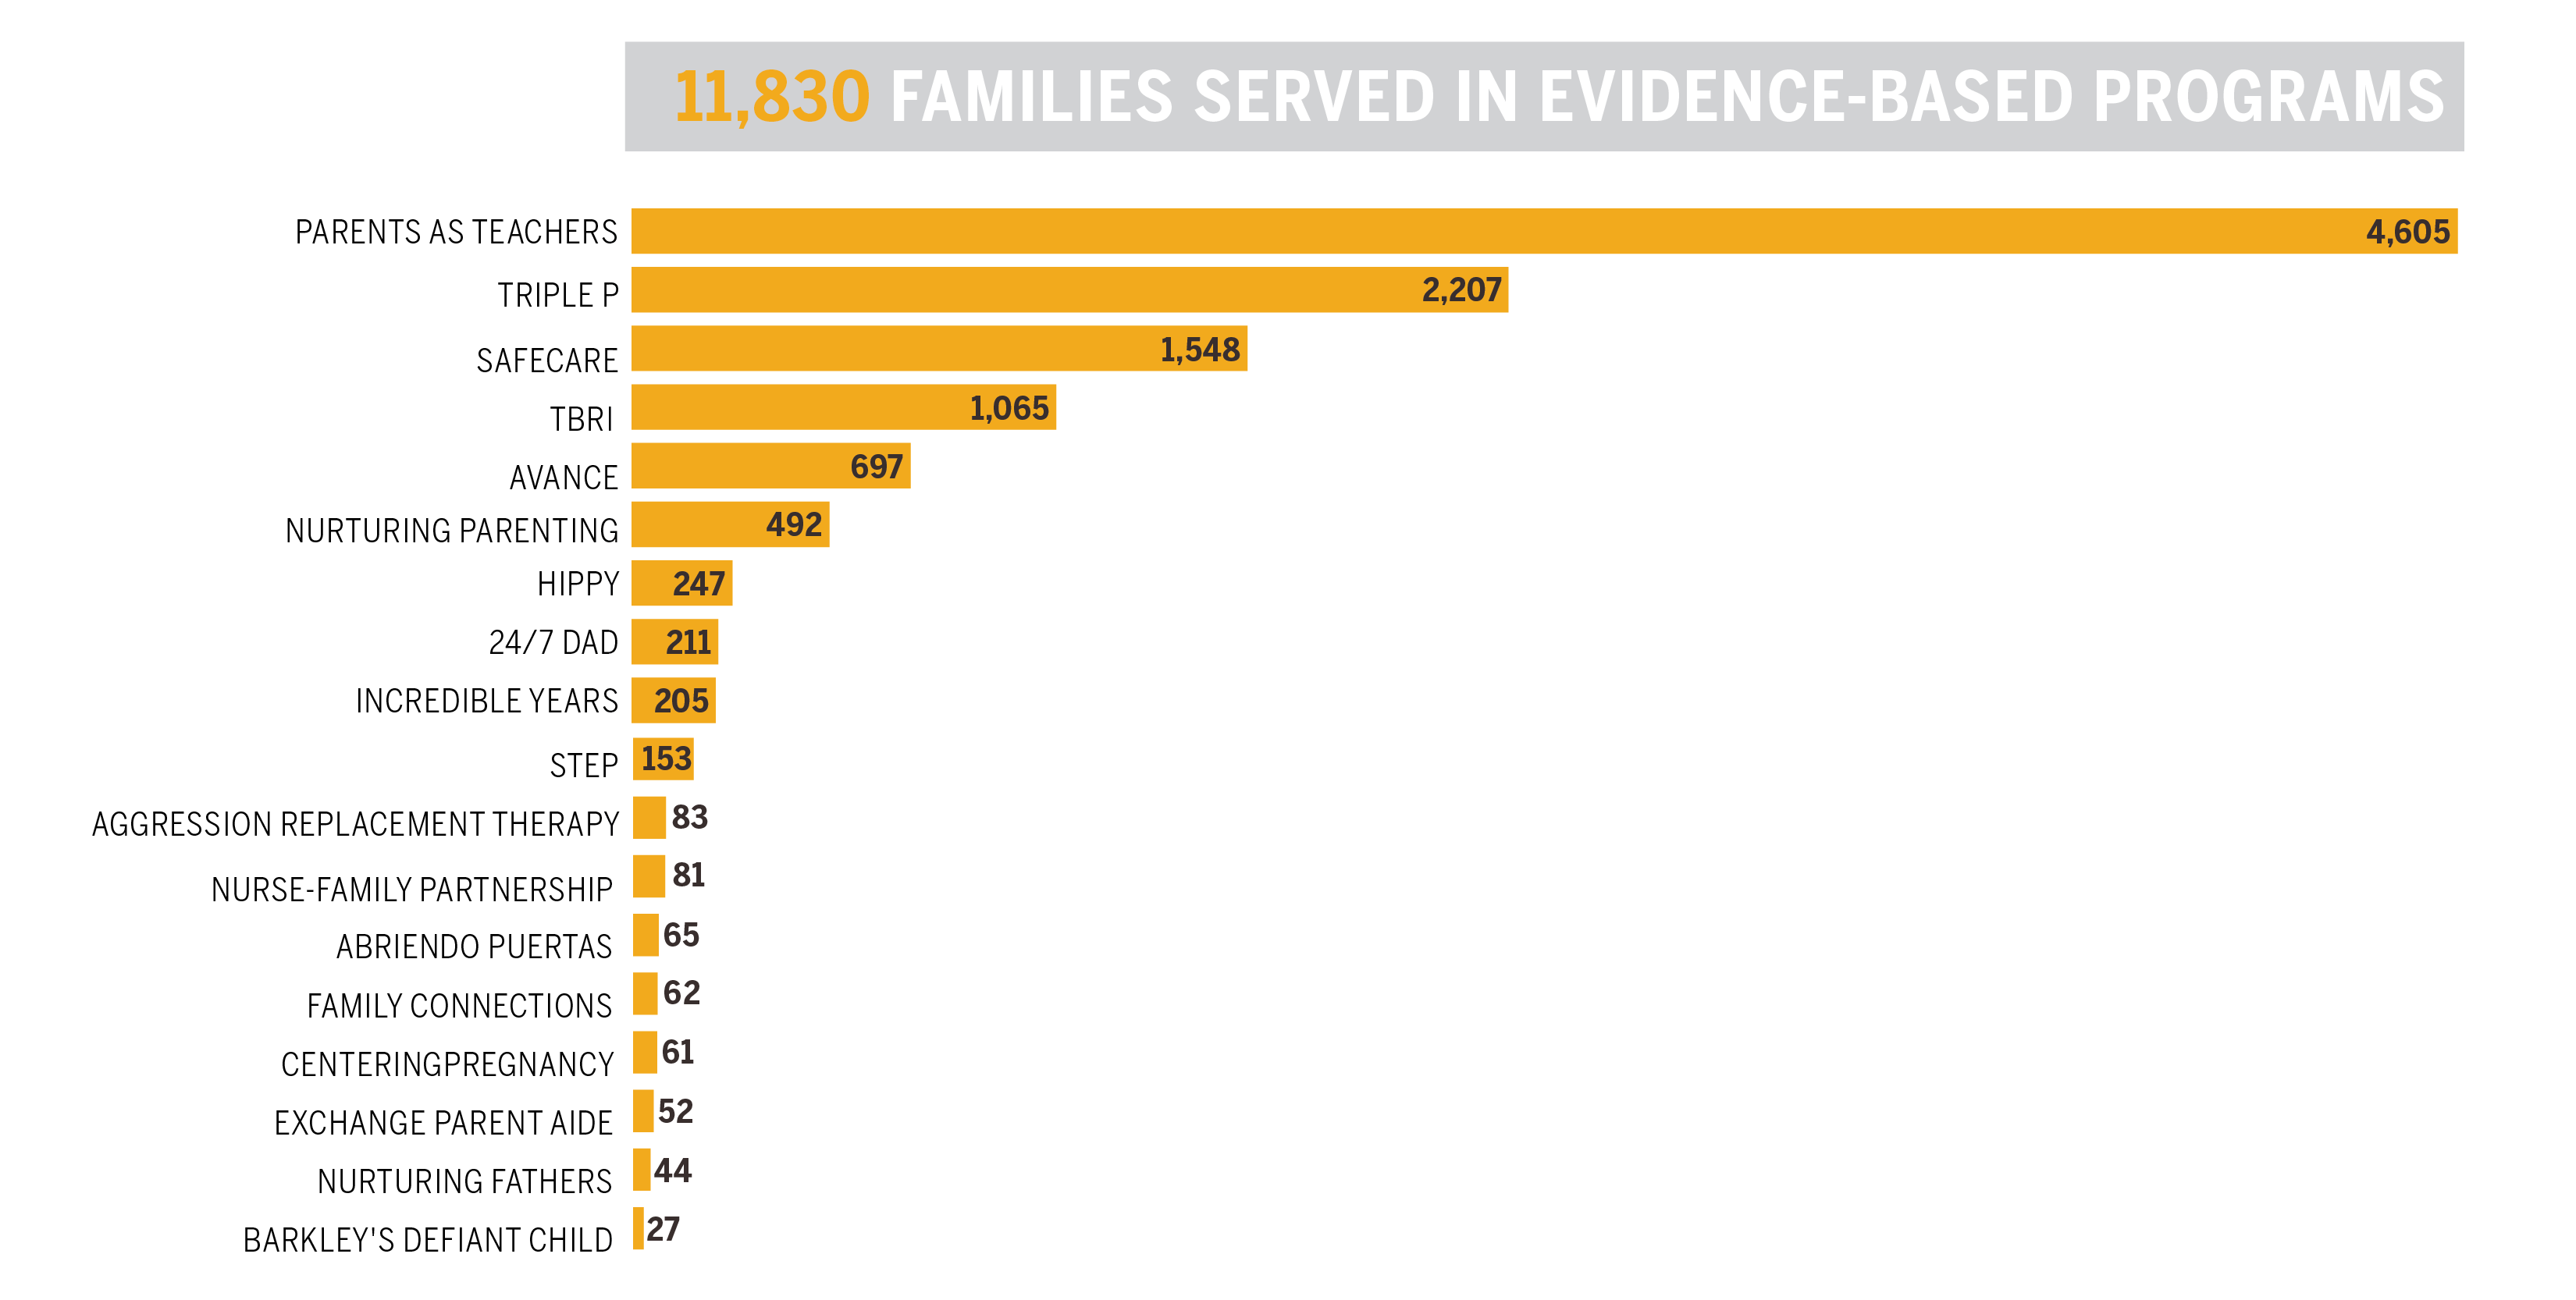 Total families served in EB Programs